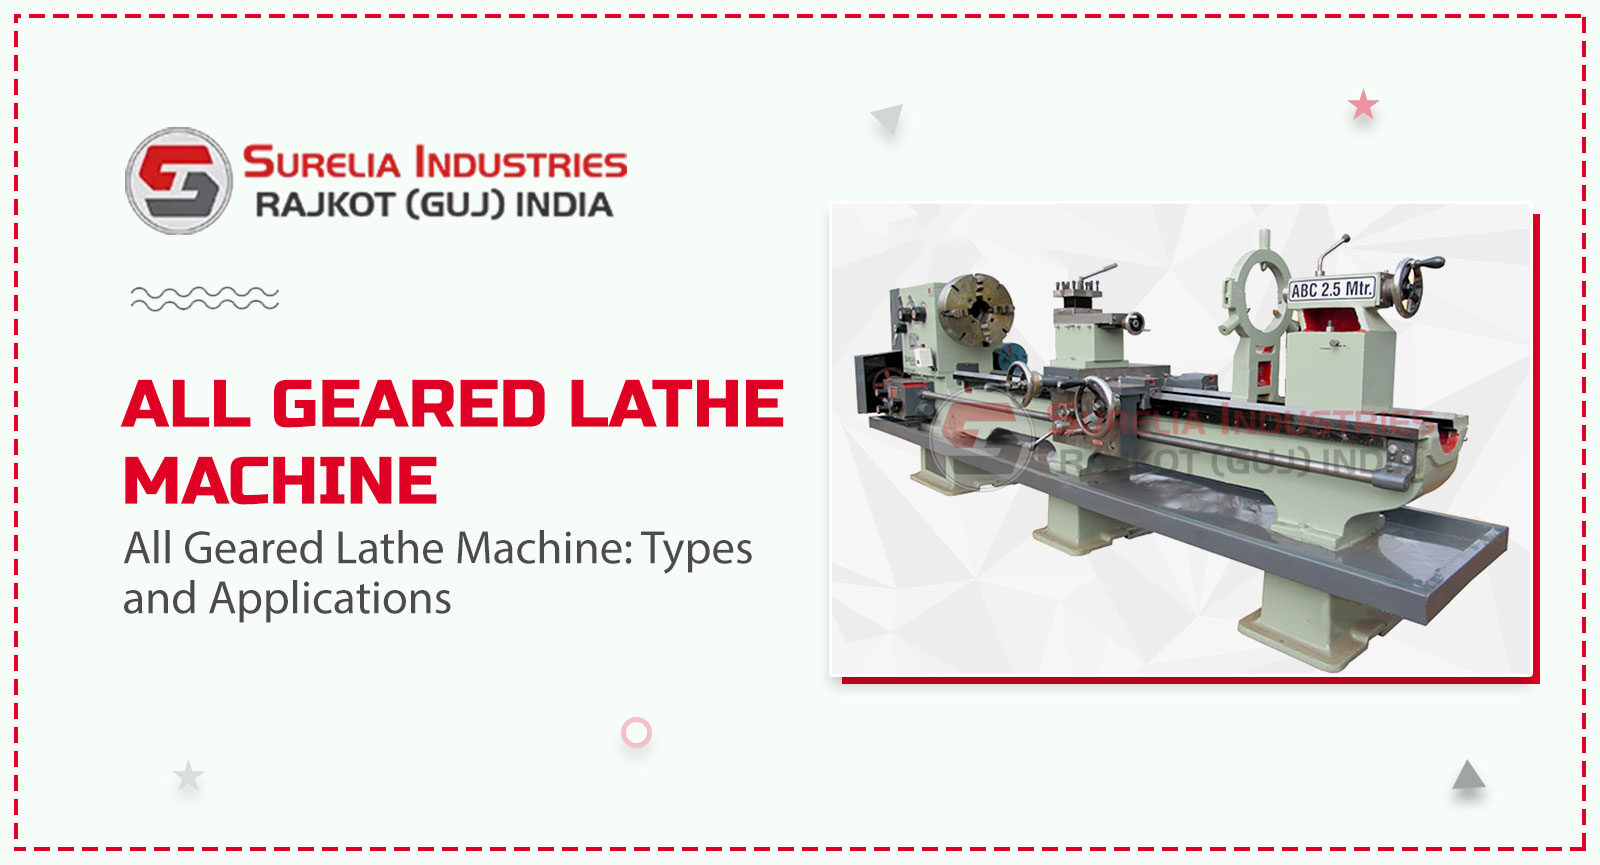 All Geared Lathe Machine: Types and Applications, Lathe Machine